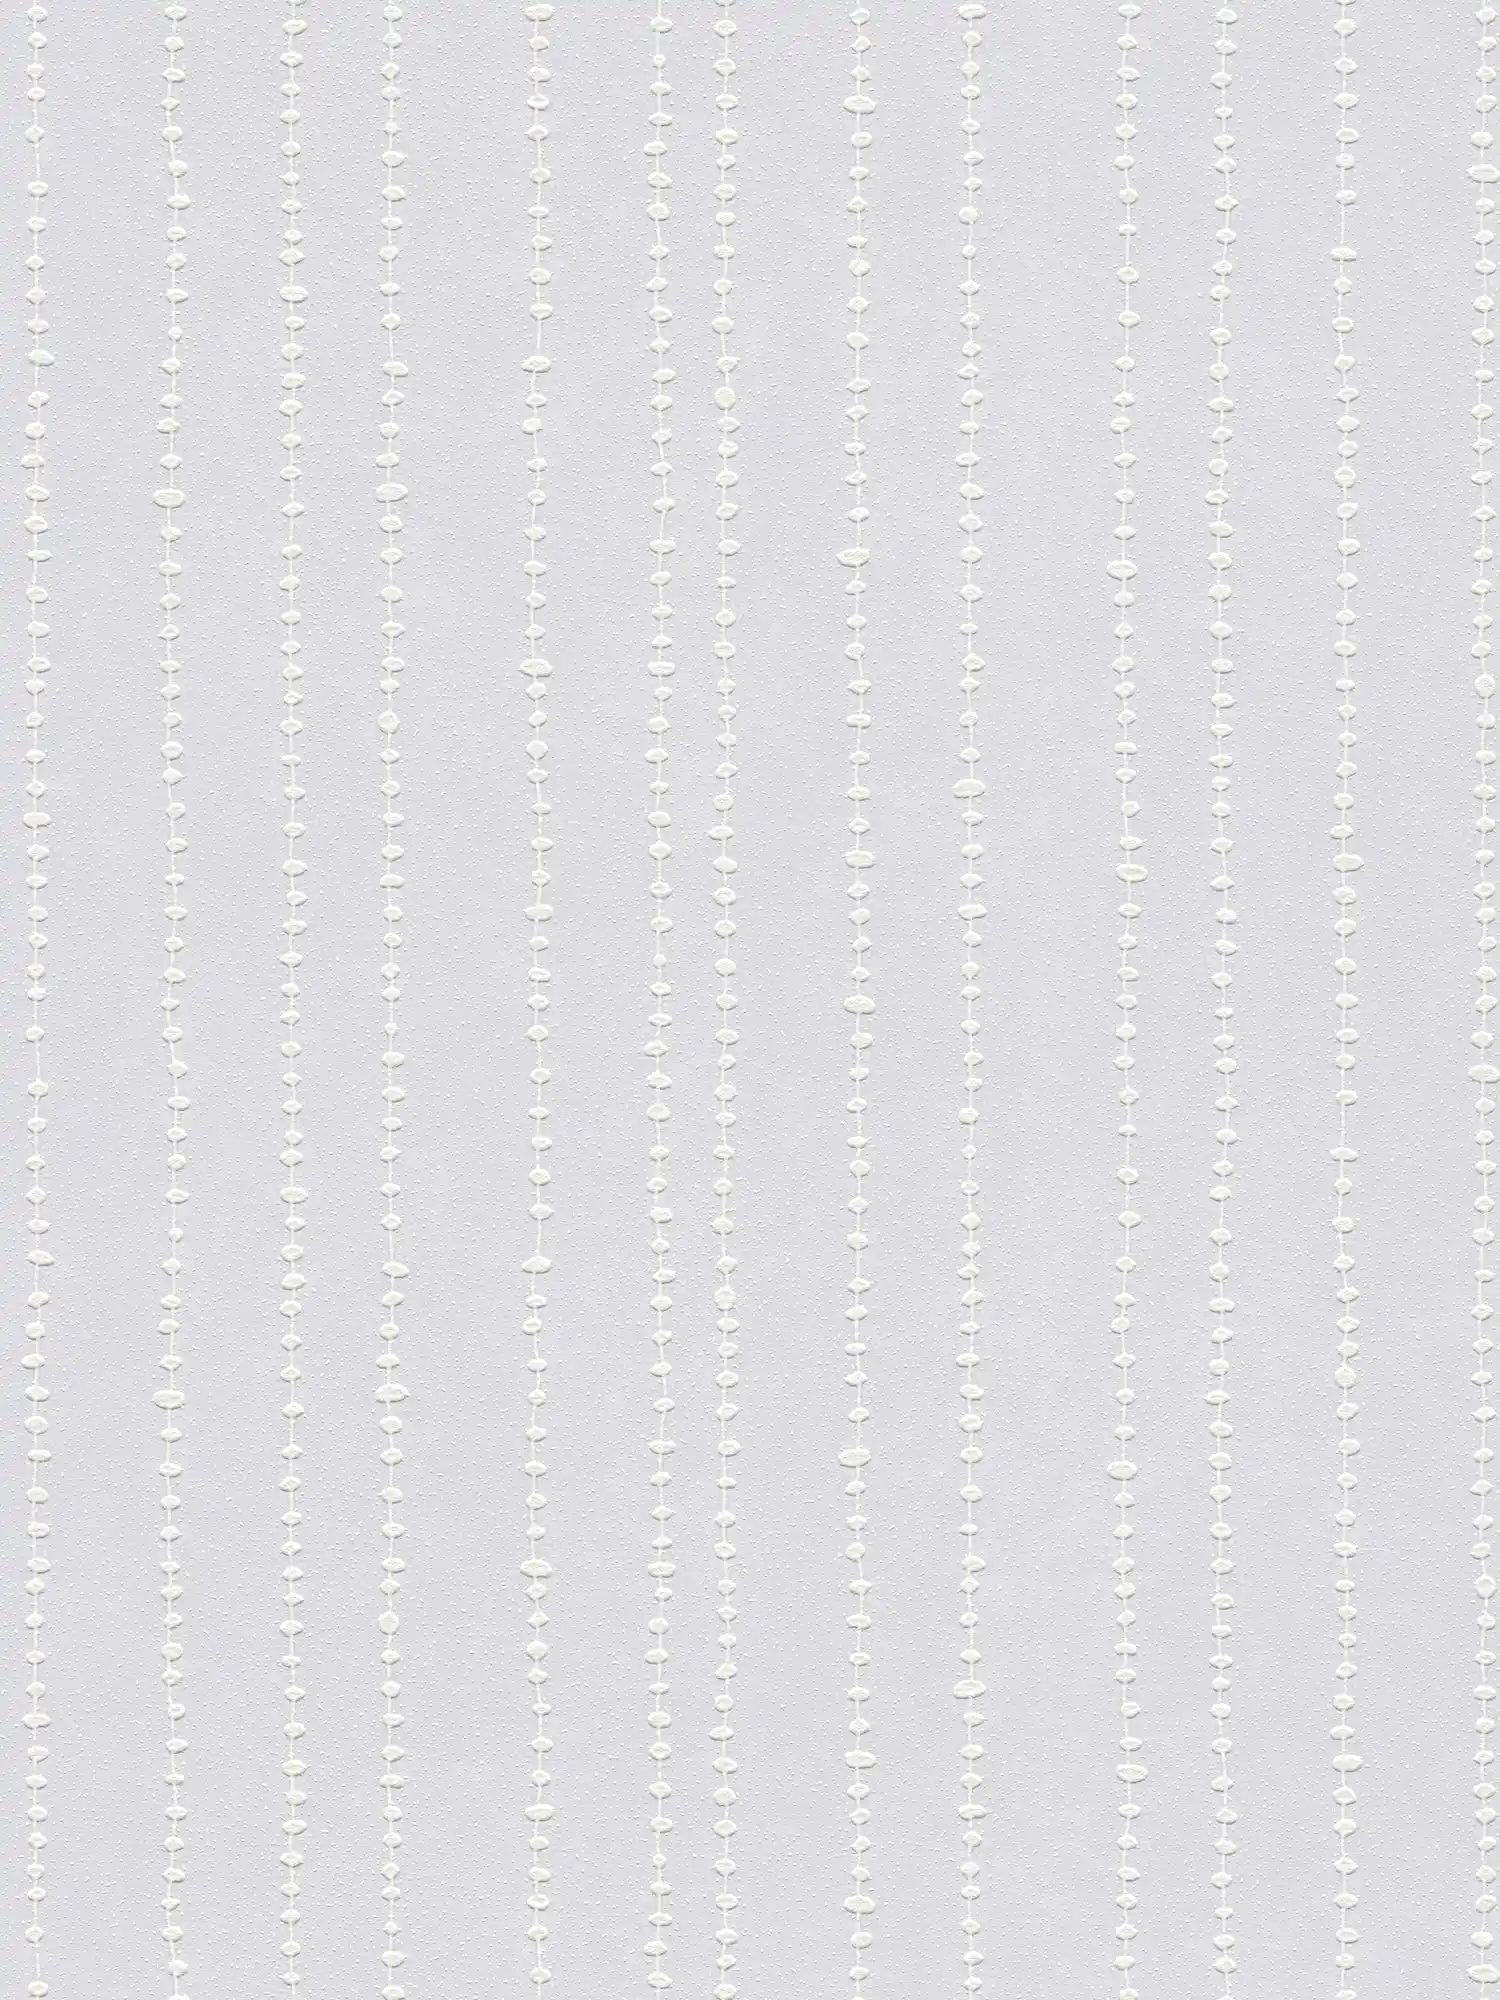 Wallpaper paintable with line pattern - Paintable
